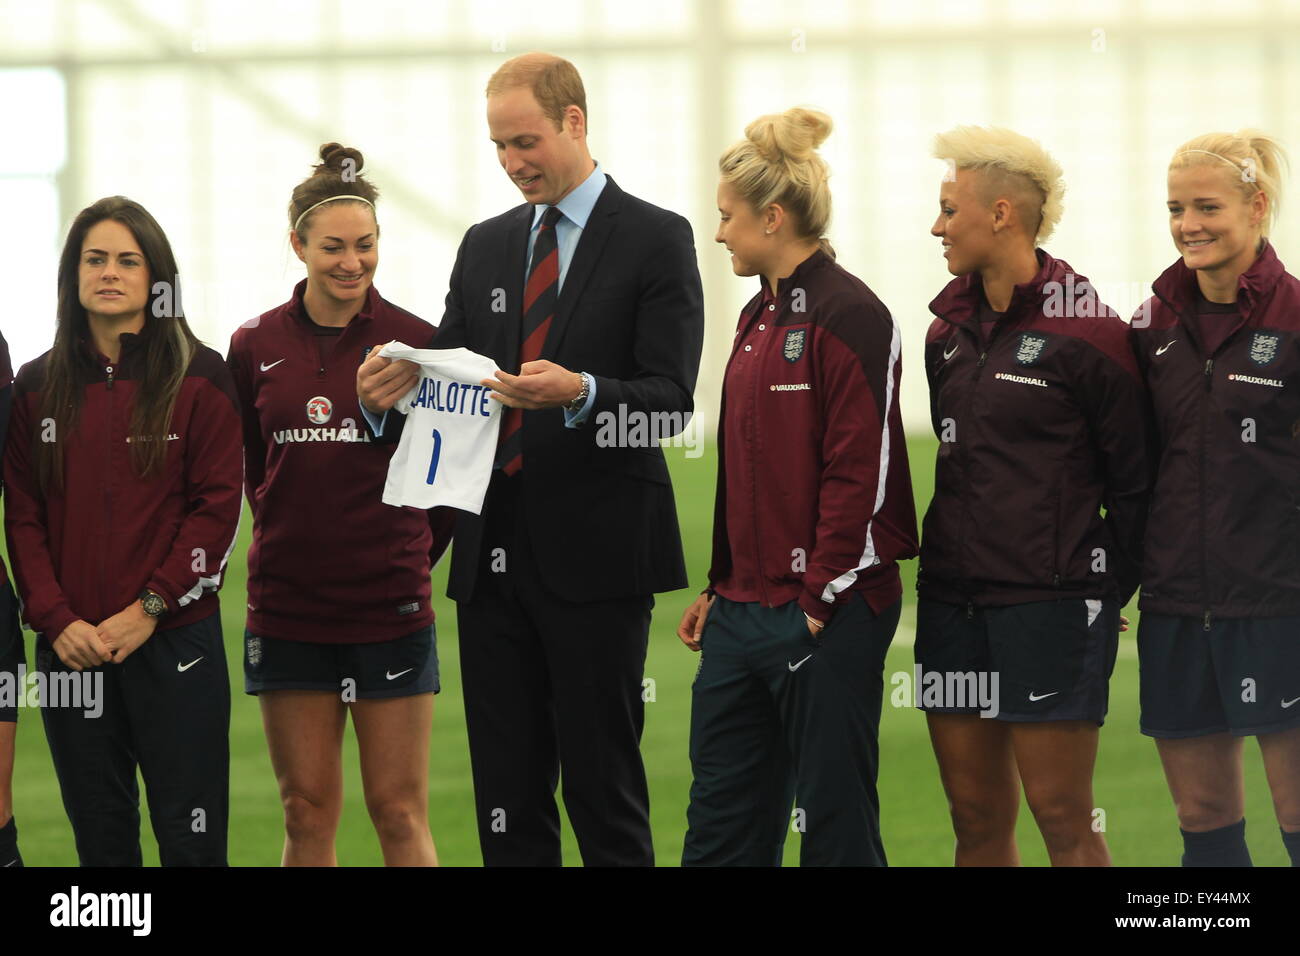 Prince William, Duke of Cambridge visits the England Senior Women’s football team at St George's Park National Football Centre ahead of their departure for the World Cup. A princess Charlotte football shirt is presented to the Duke.  Featuring: Prince Wil Stock Photo